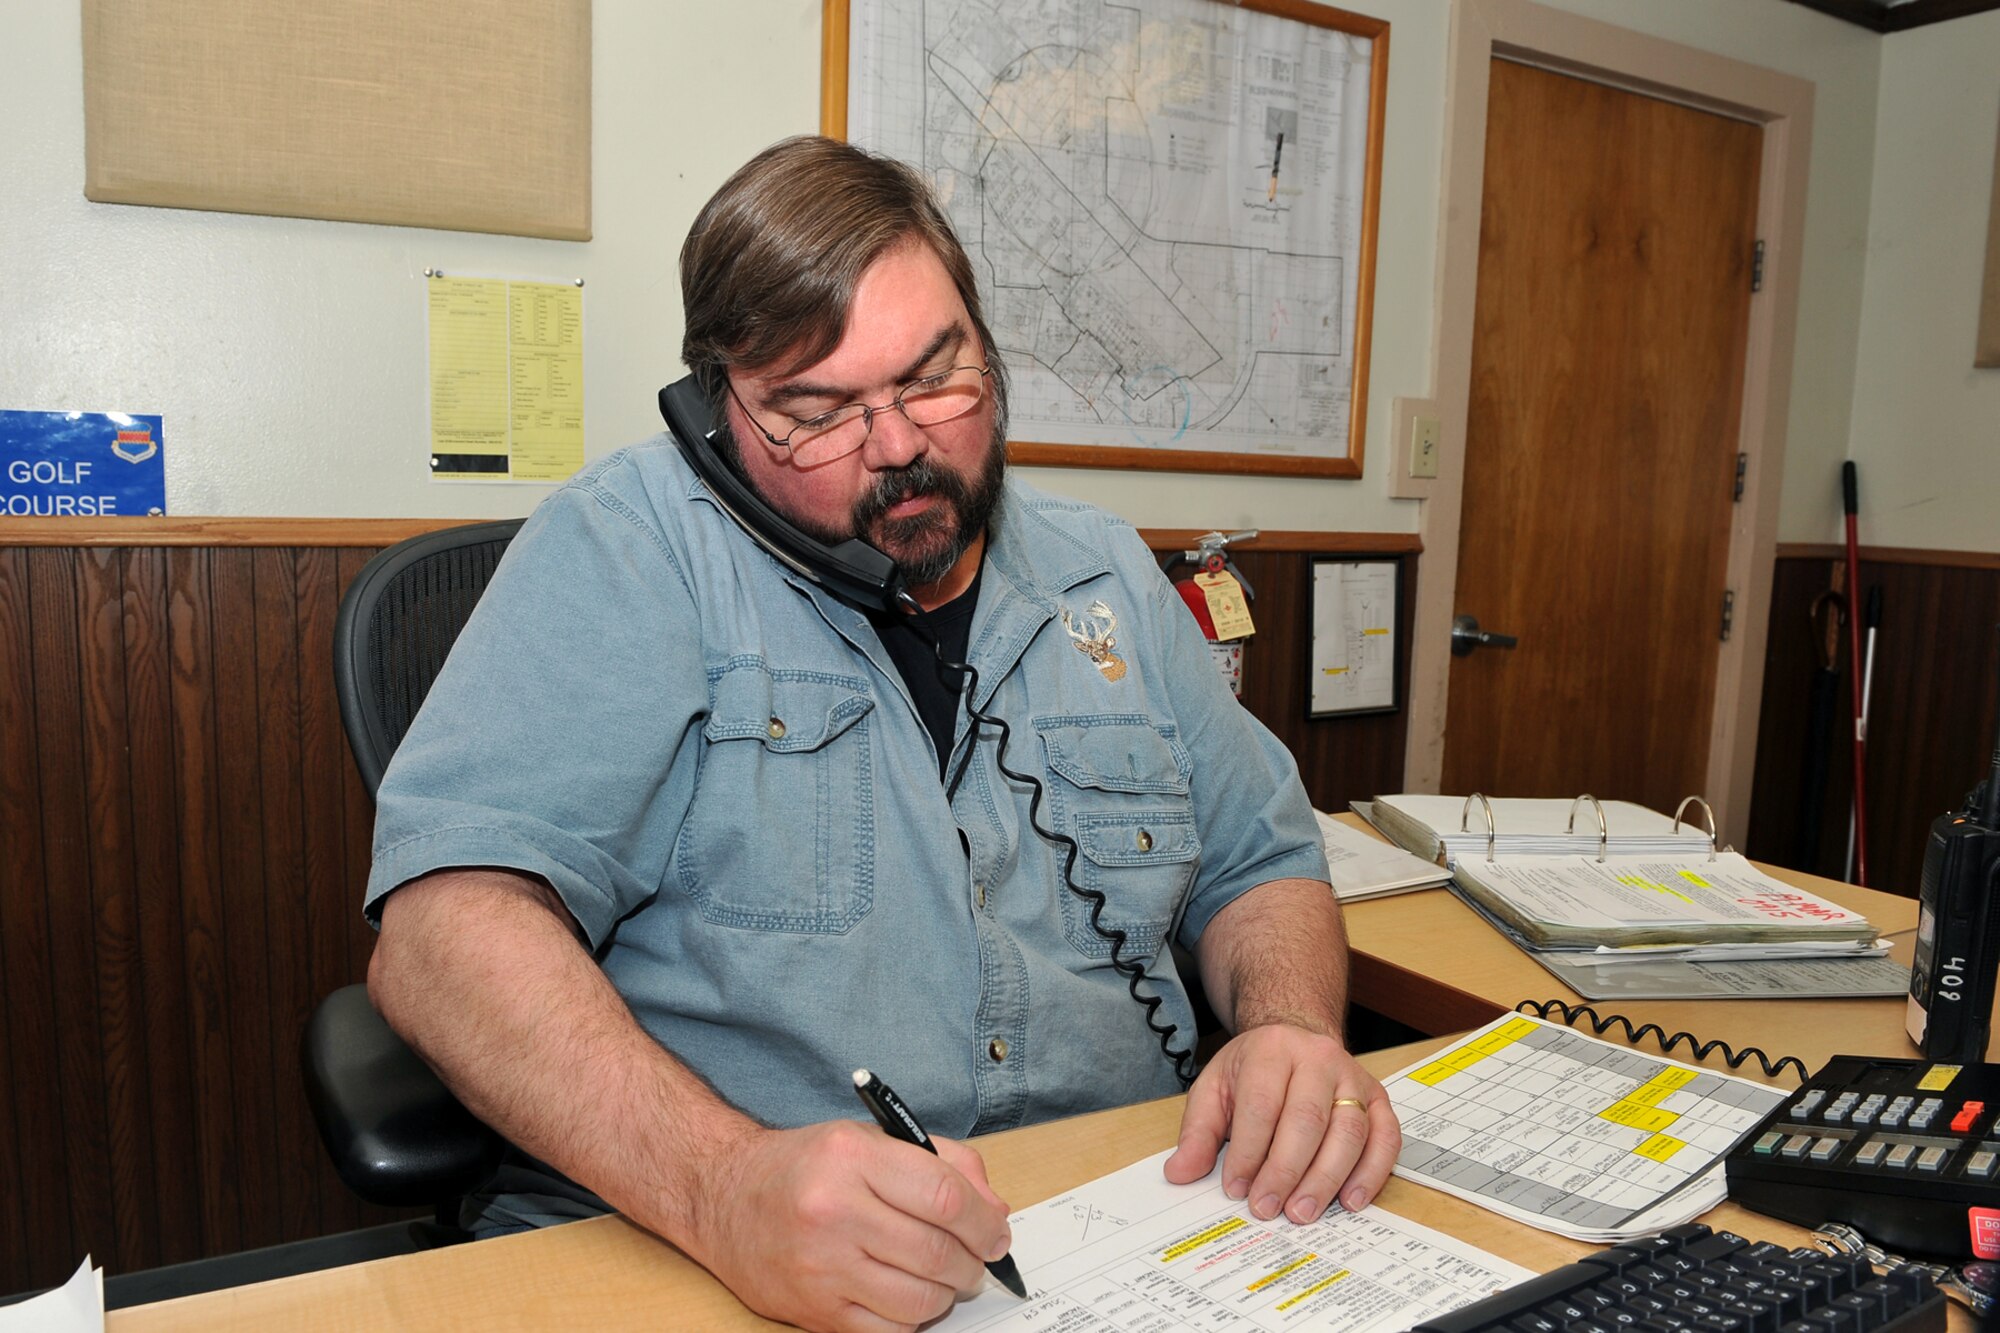 OFFUTT AIR FORCE BASE, Neb. - Mark "Gus" Gustafson, a vehicle dispatcher with the 55th Mission Support Group's Logistics Support Division, receives a call from a customer inside the vehicle operations office March 19. The division's vehicle operations section takes care of Offutt's transportation needs using a fleet of more than 60 vehicles.  

U.S. Air Force photo by Charles Haymond